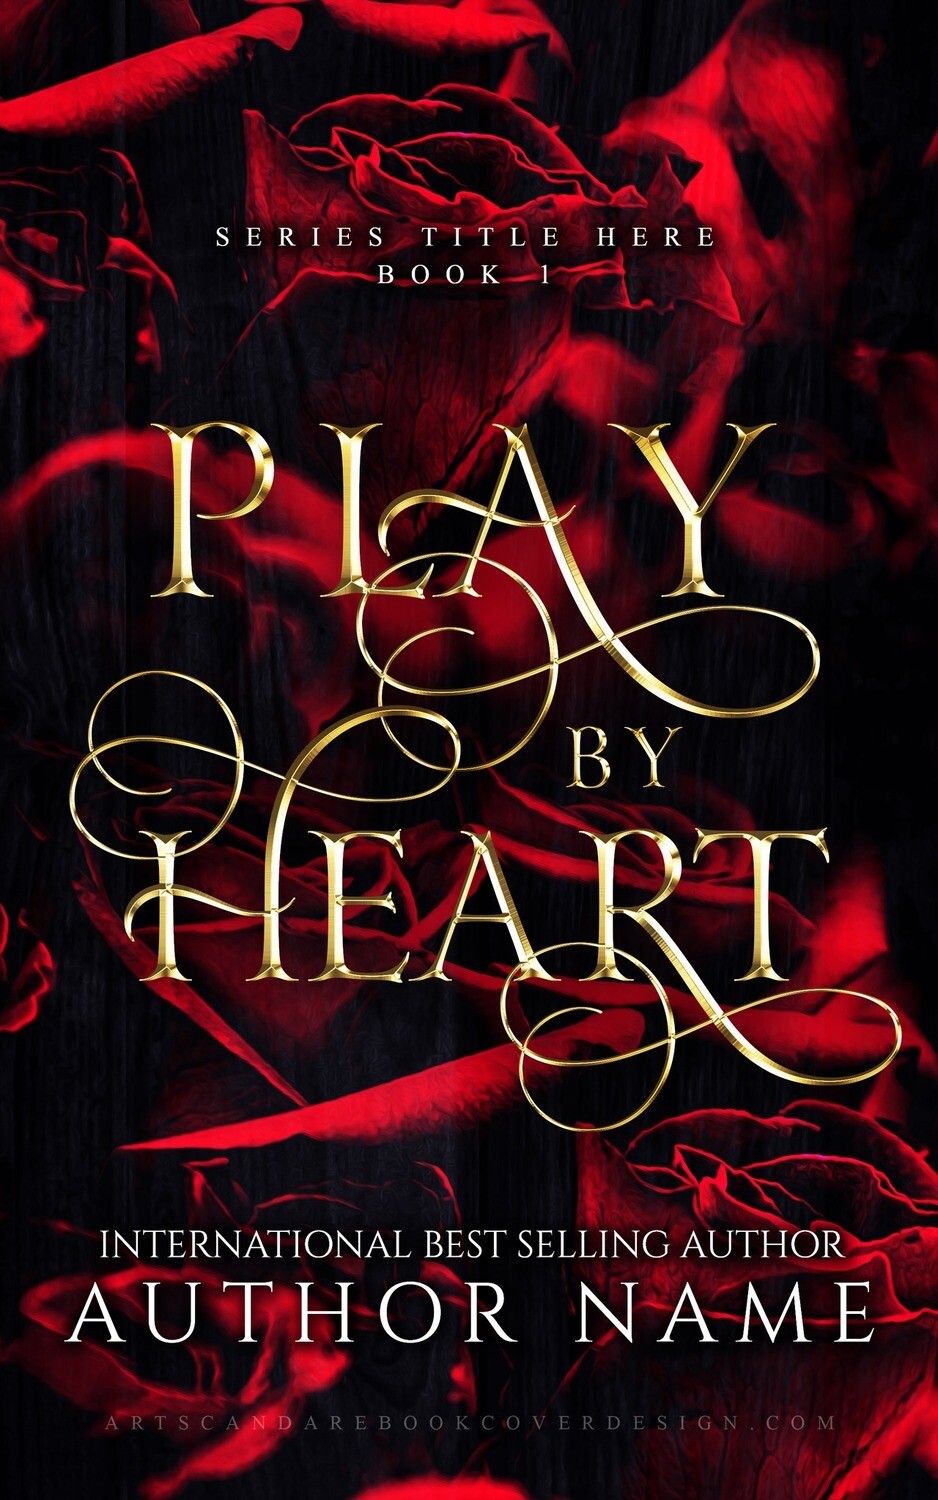 PLAY BY HEART